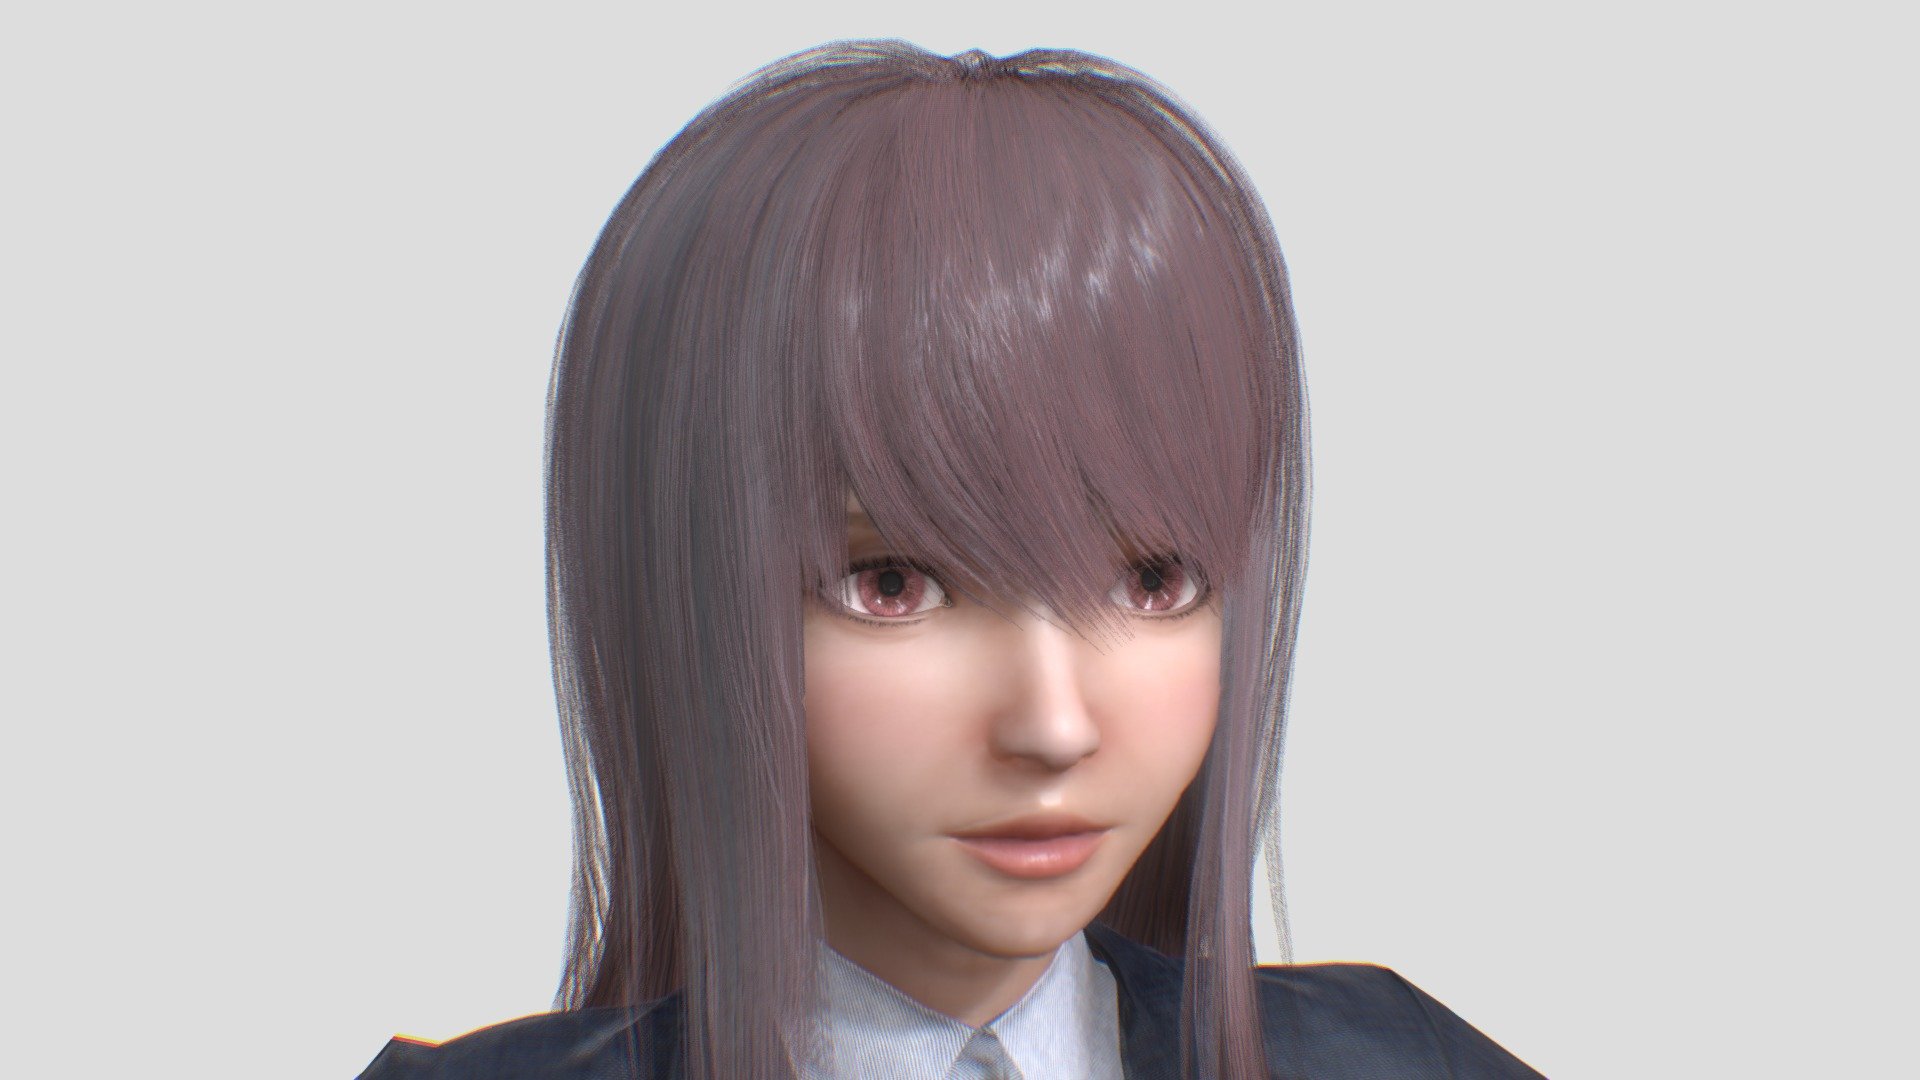 3D character in school uniform style.
Includes humanoid rig and extensive facial animation.
Fully PBR based textures.
Hair, cloth, skin and eye materials set up for HDRP.

【Unity Asset Store】
uniform girl

【YouTube】
https://youtu.be/C6Oh4qm_fV4 - Uniform Girl - 3D model by TSUNAstar 3d model